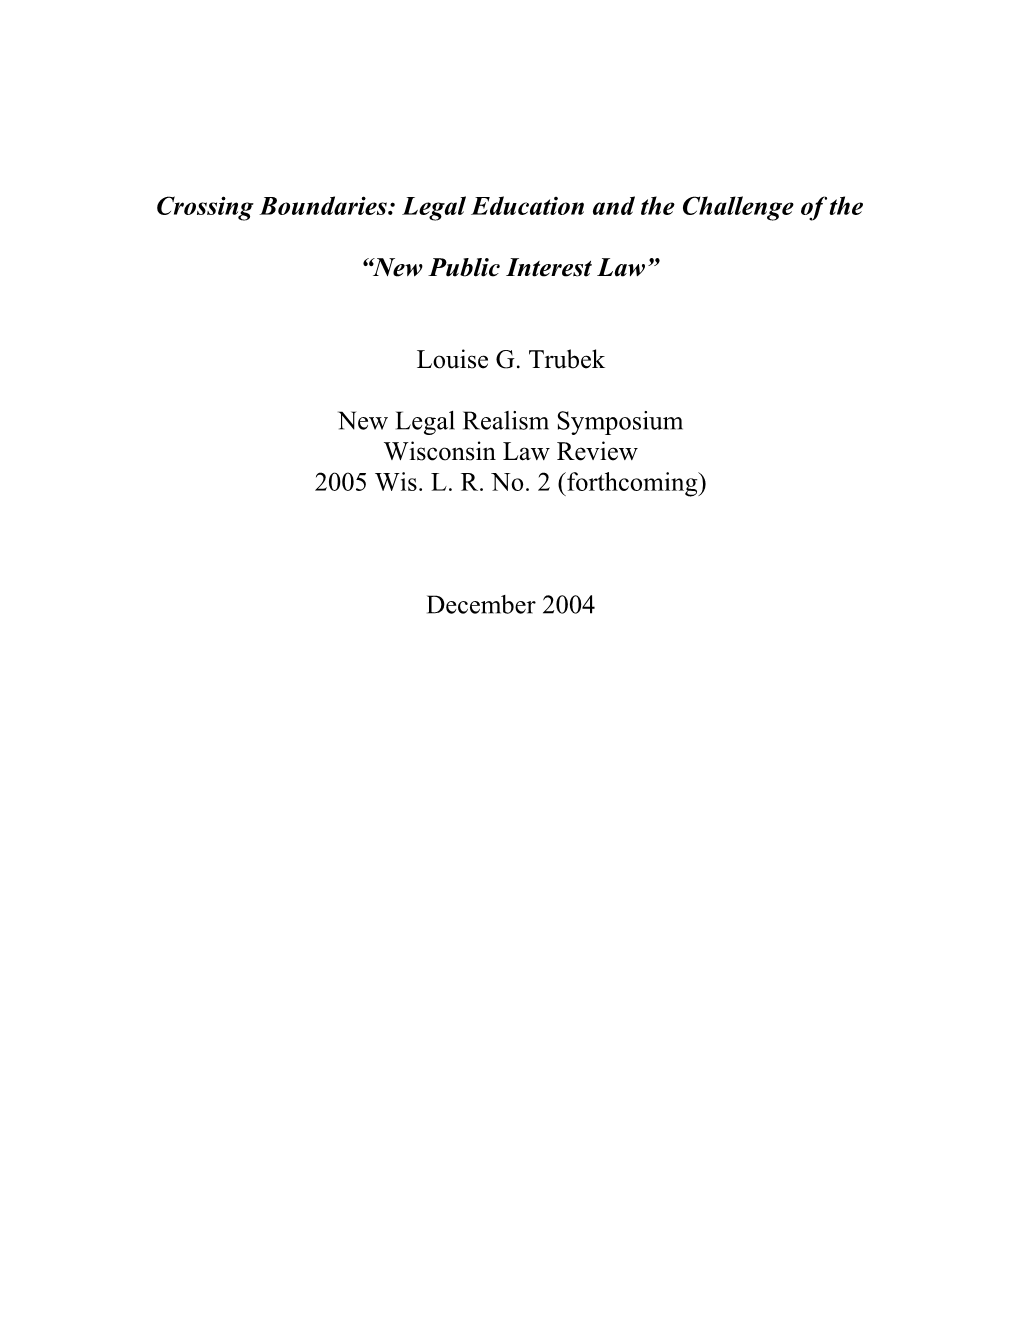 Crossing Boundaries: Legal Education and the Challenge of the New Public Interest Law